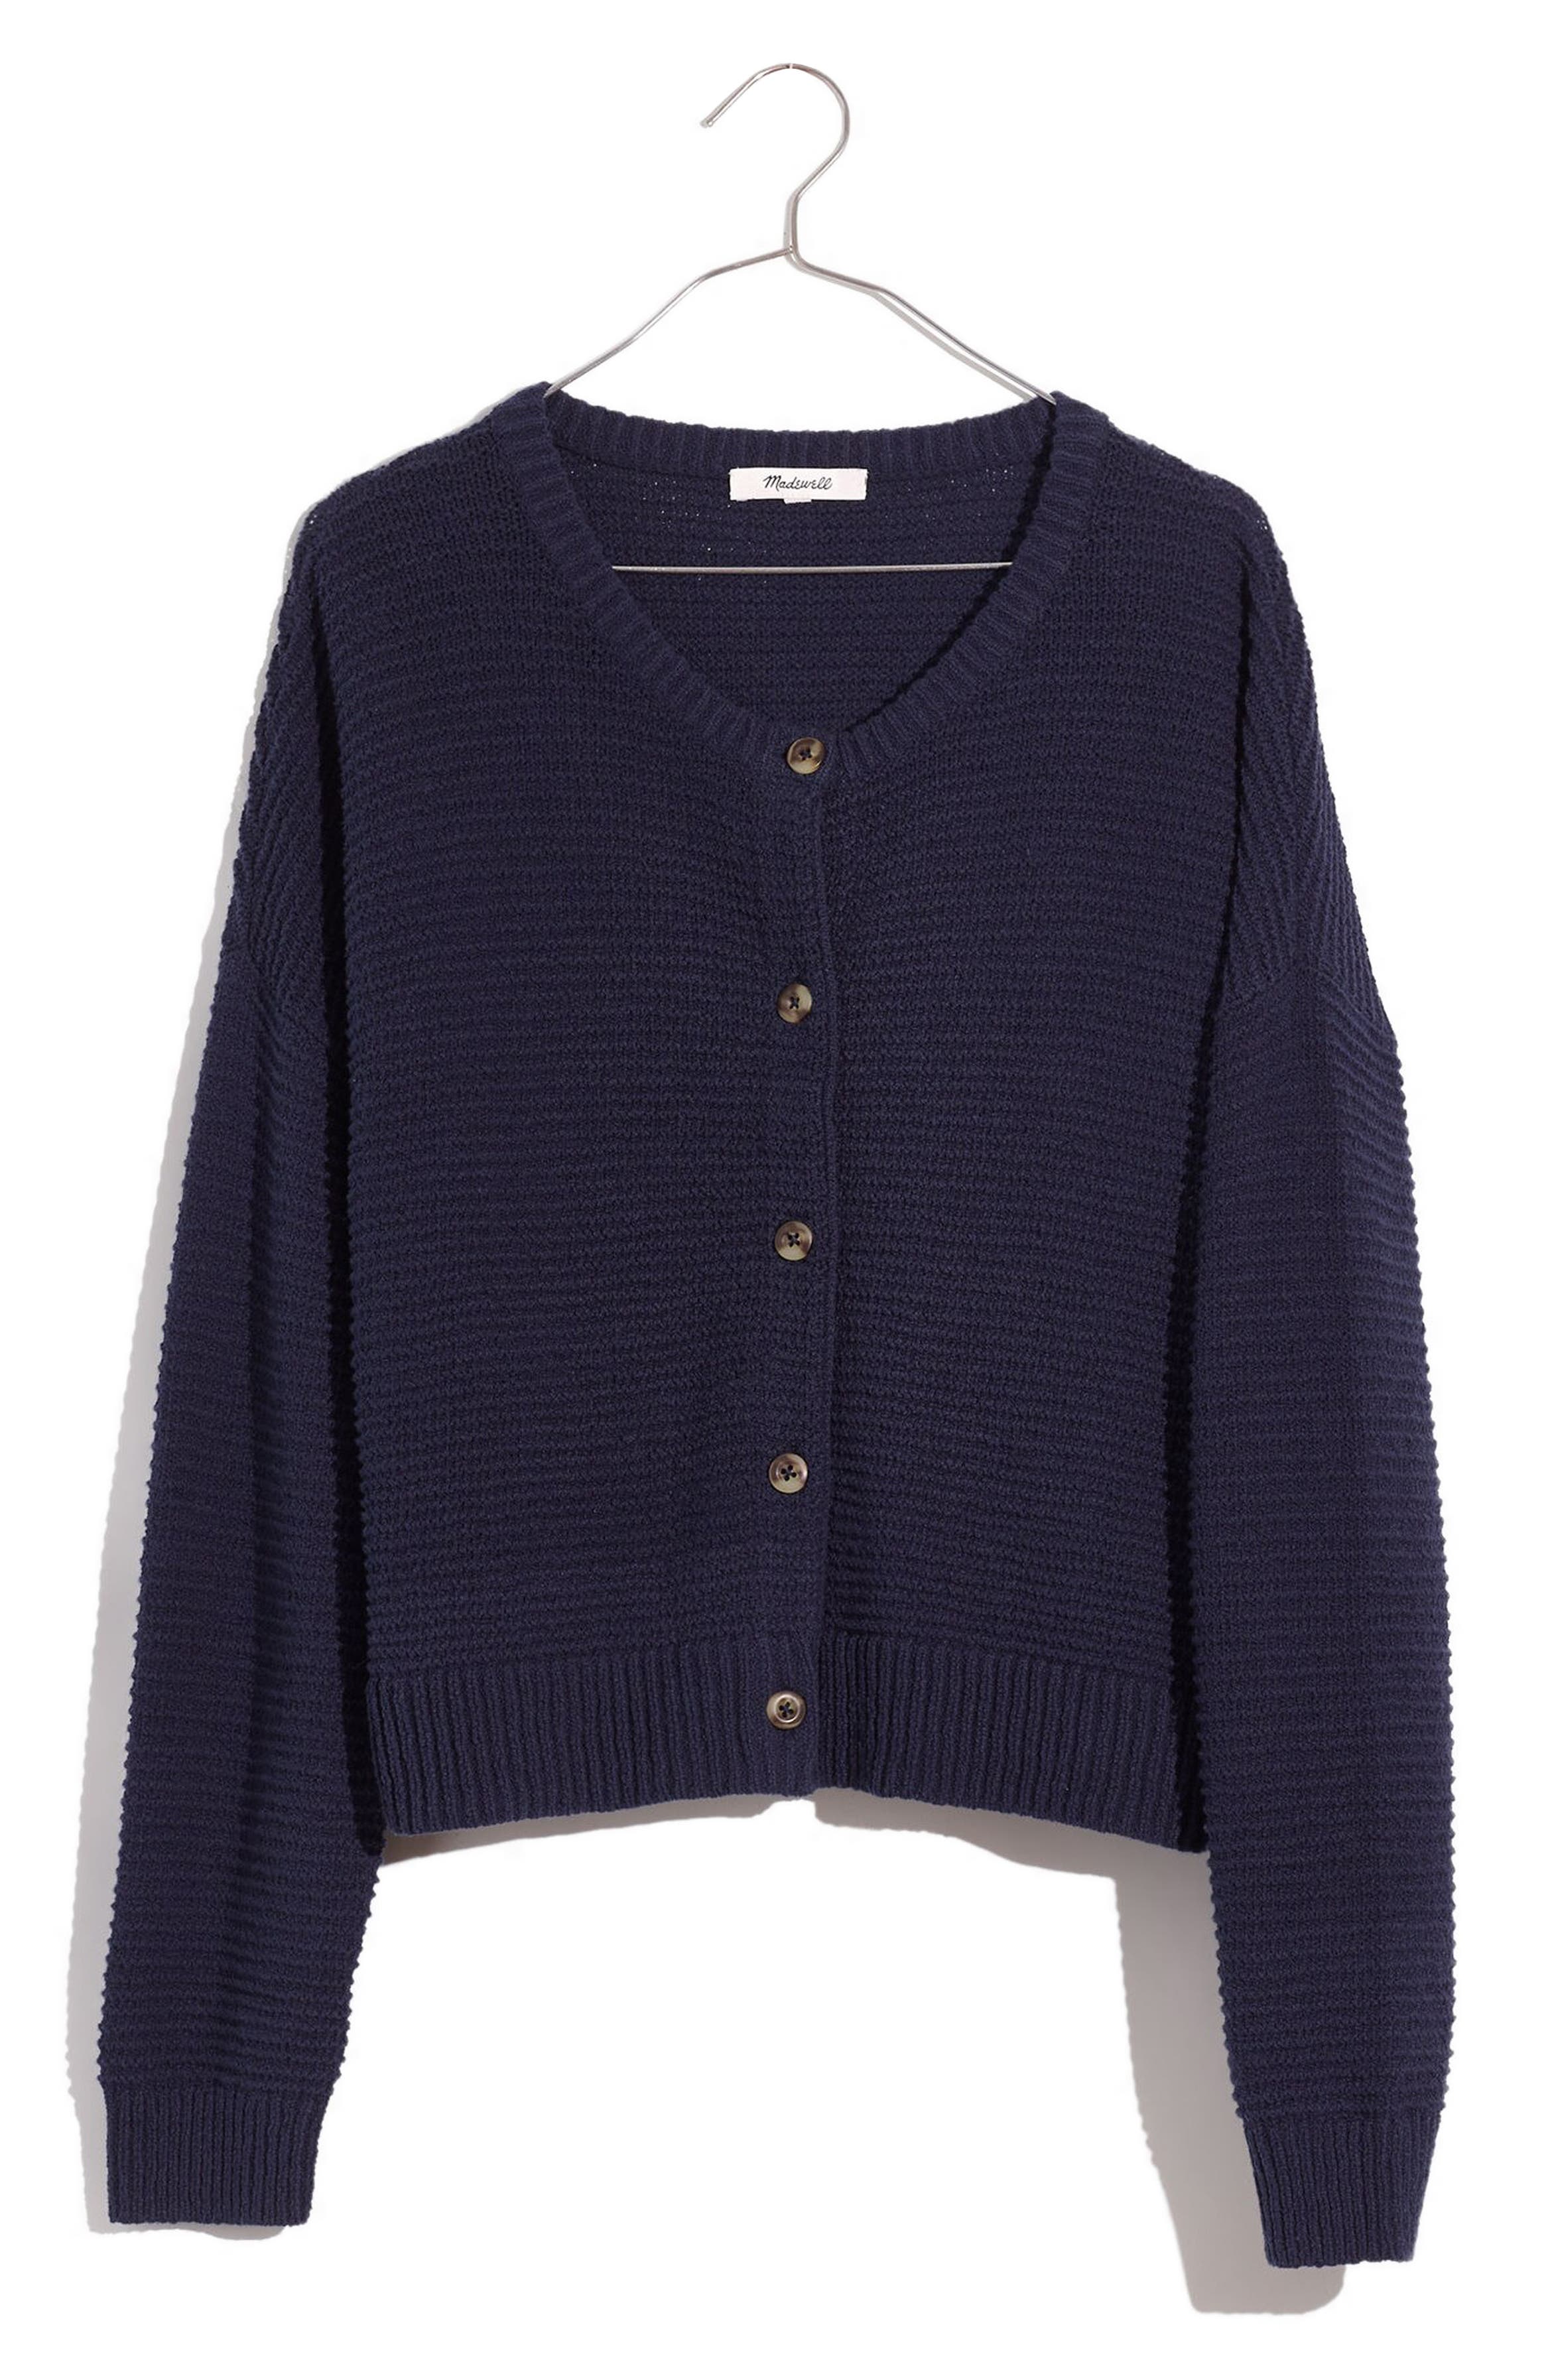 Madewell Deville Cardigan Sweater | Nordstrom